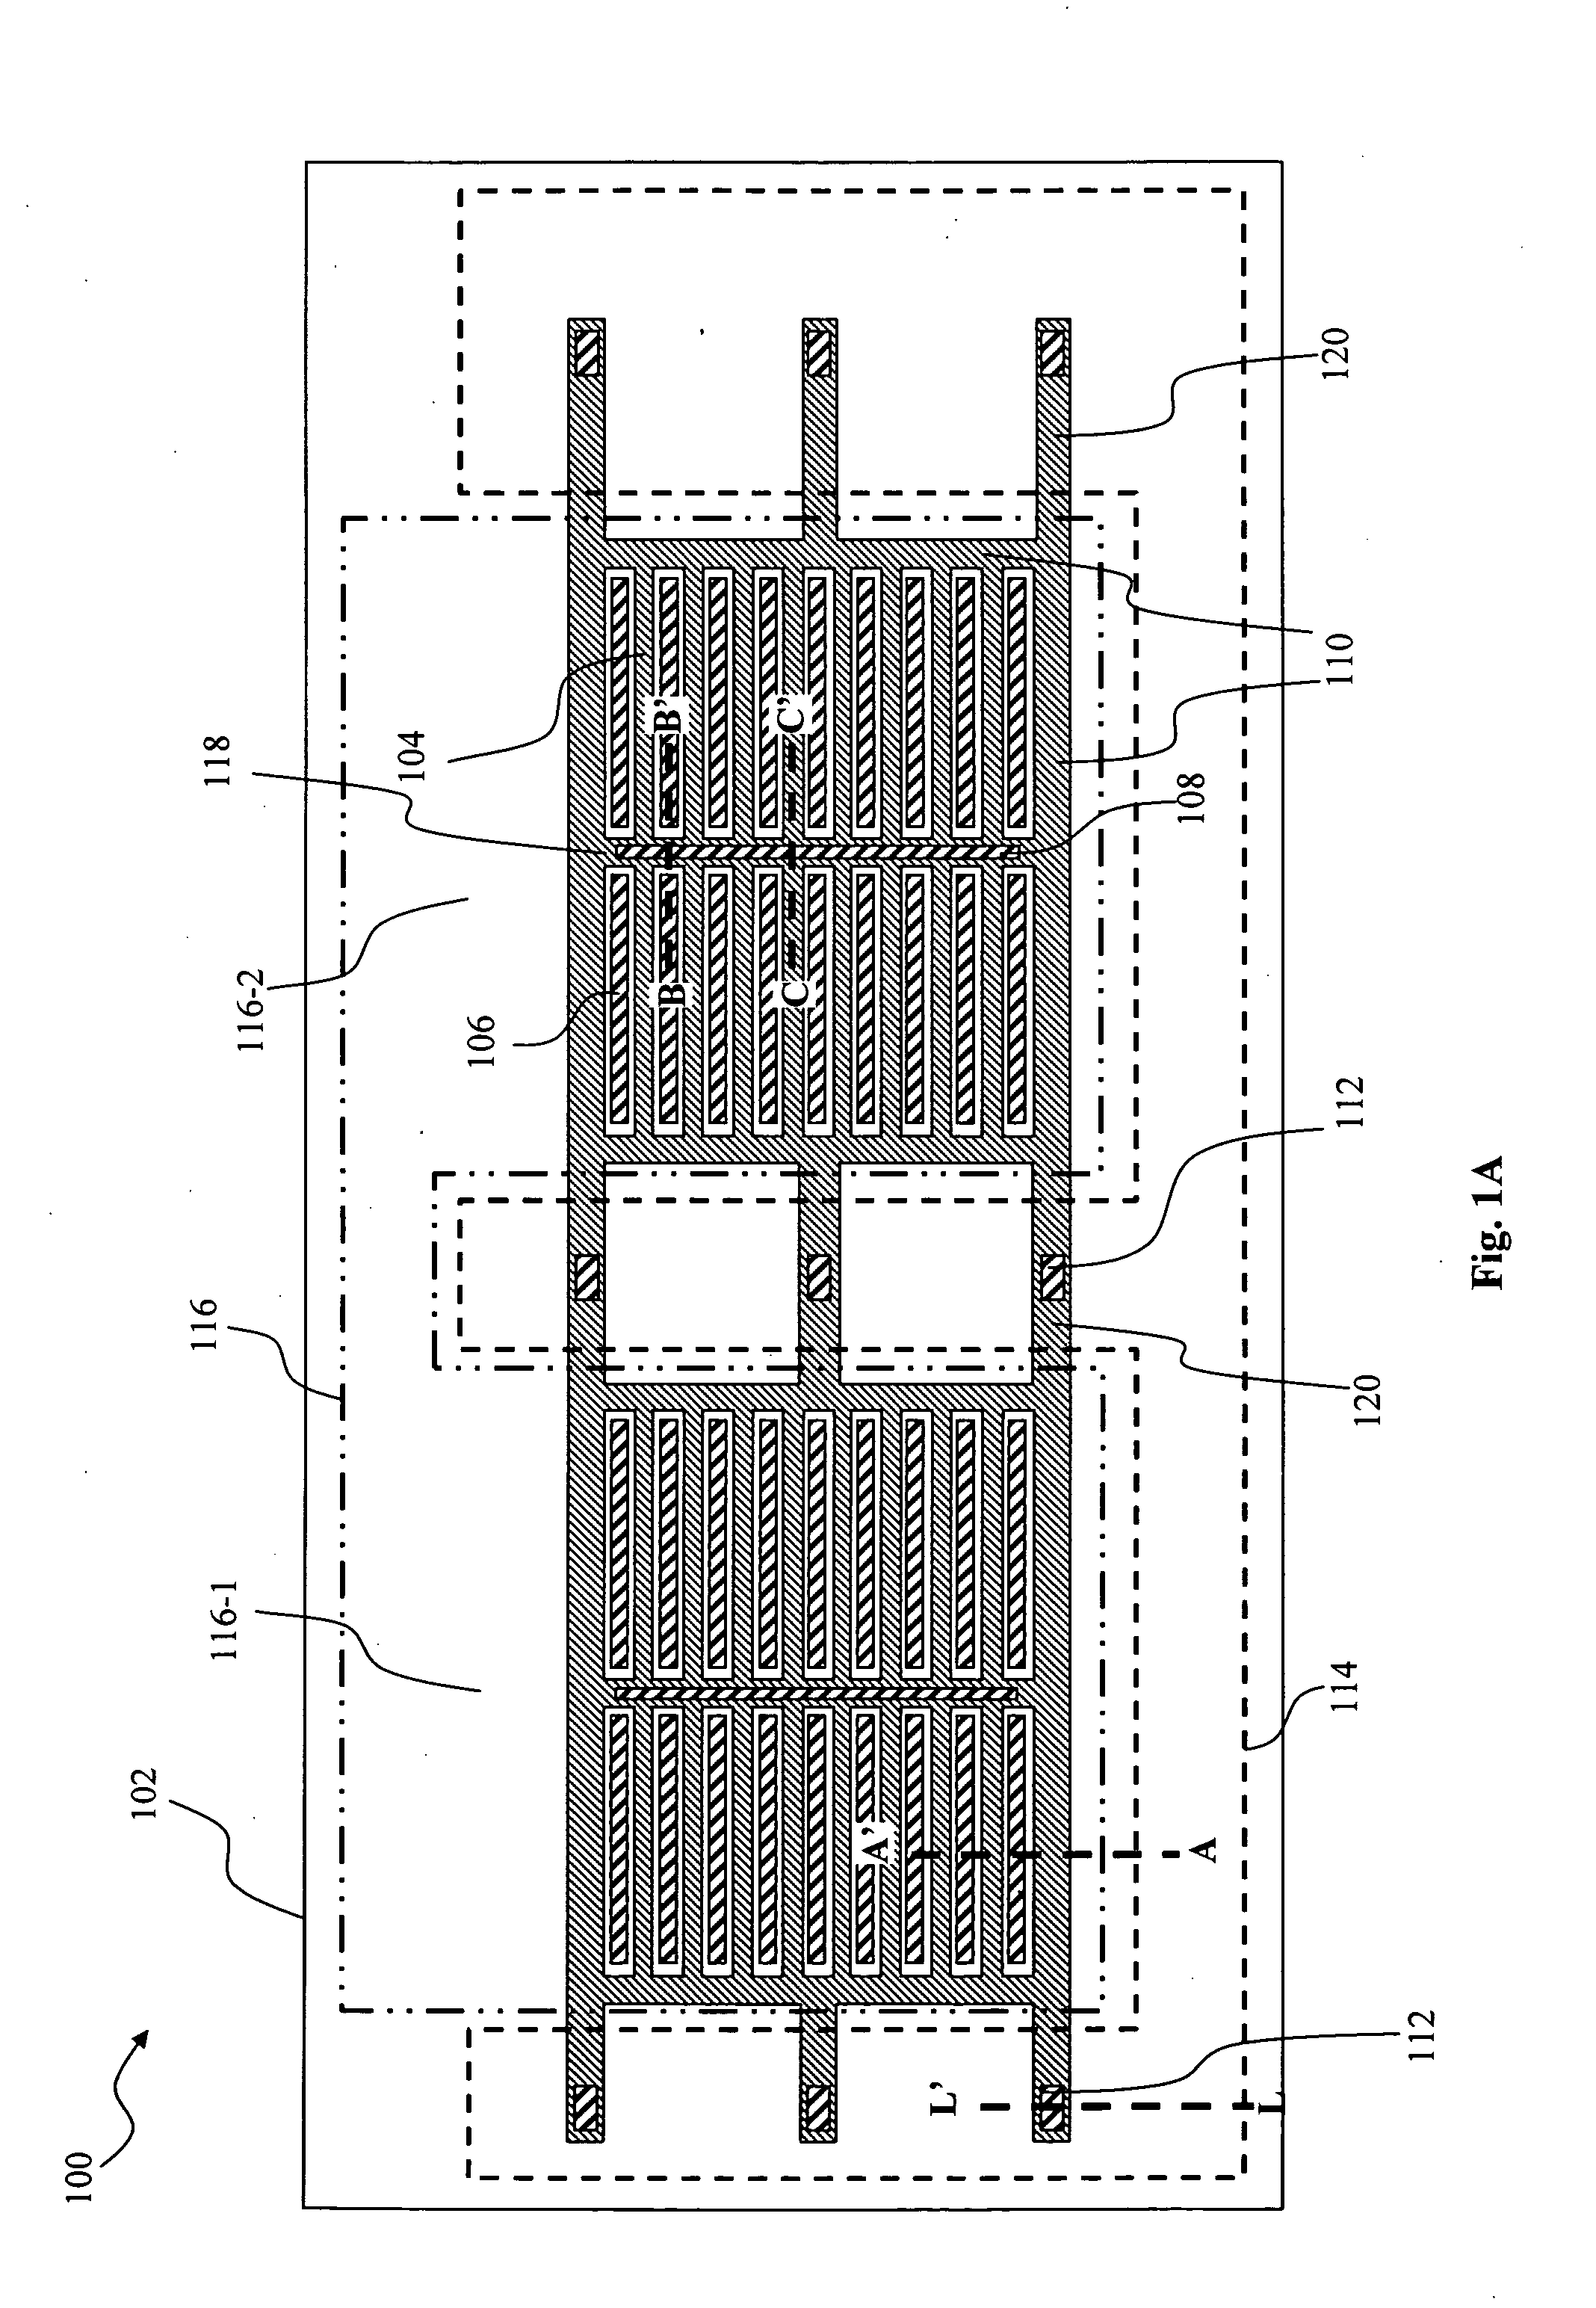 Shielded gate trench MOSFET device and fabrication